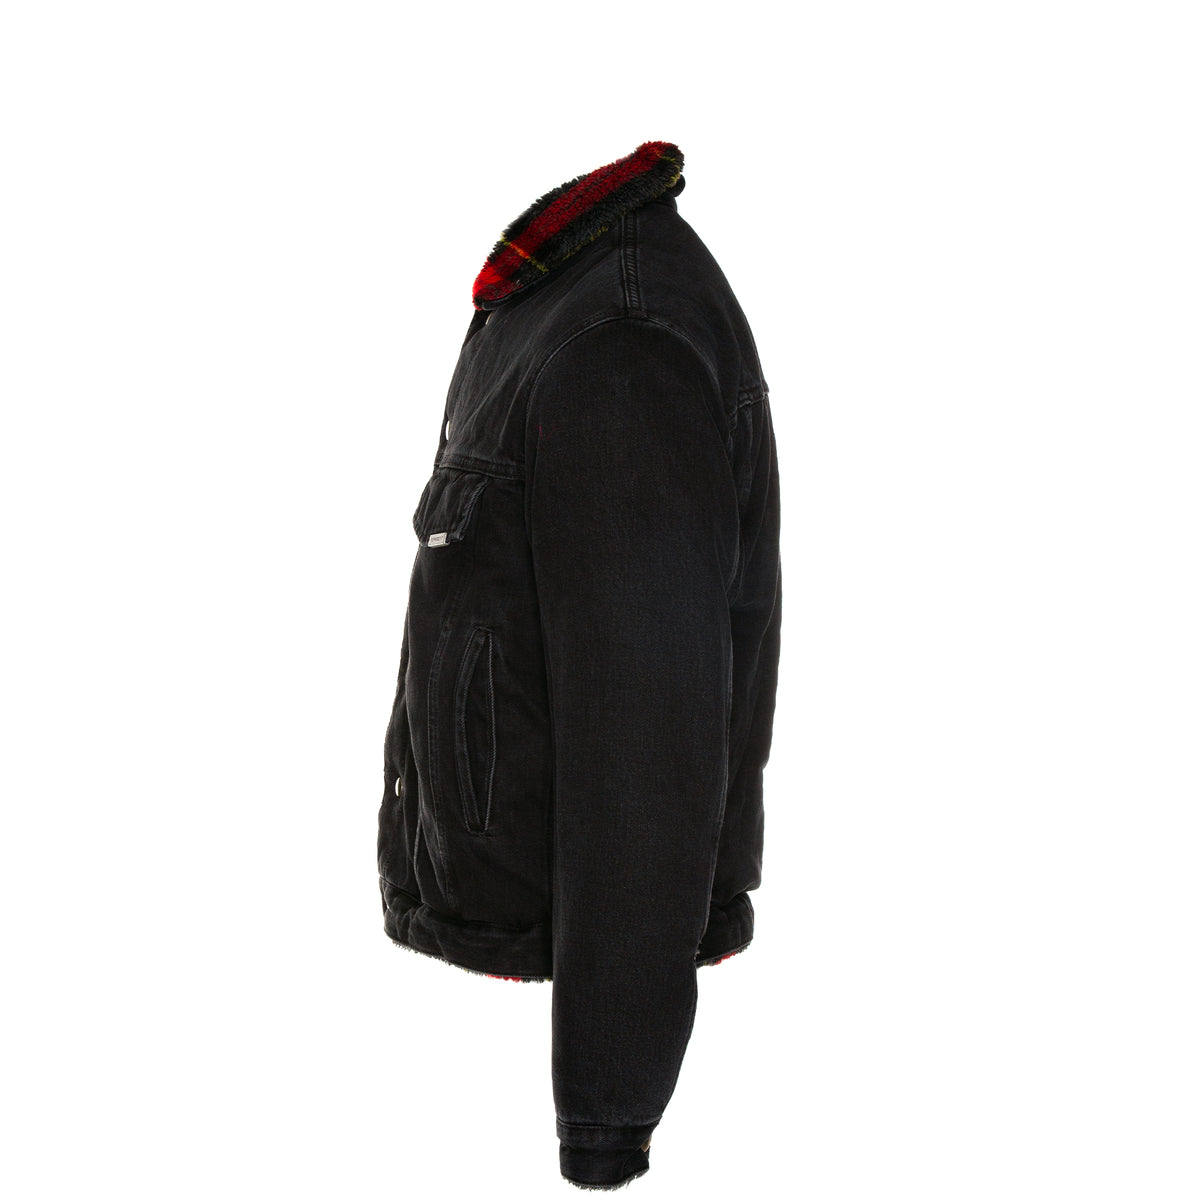 Represent Reversible Sherpa Denim Jacket in Black with Plaid Lining